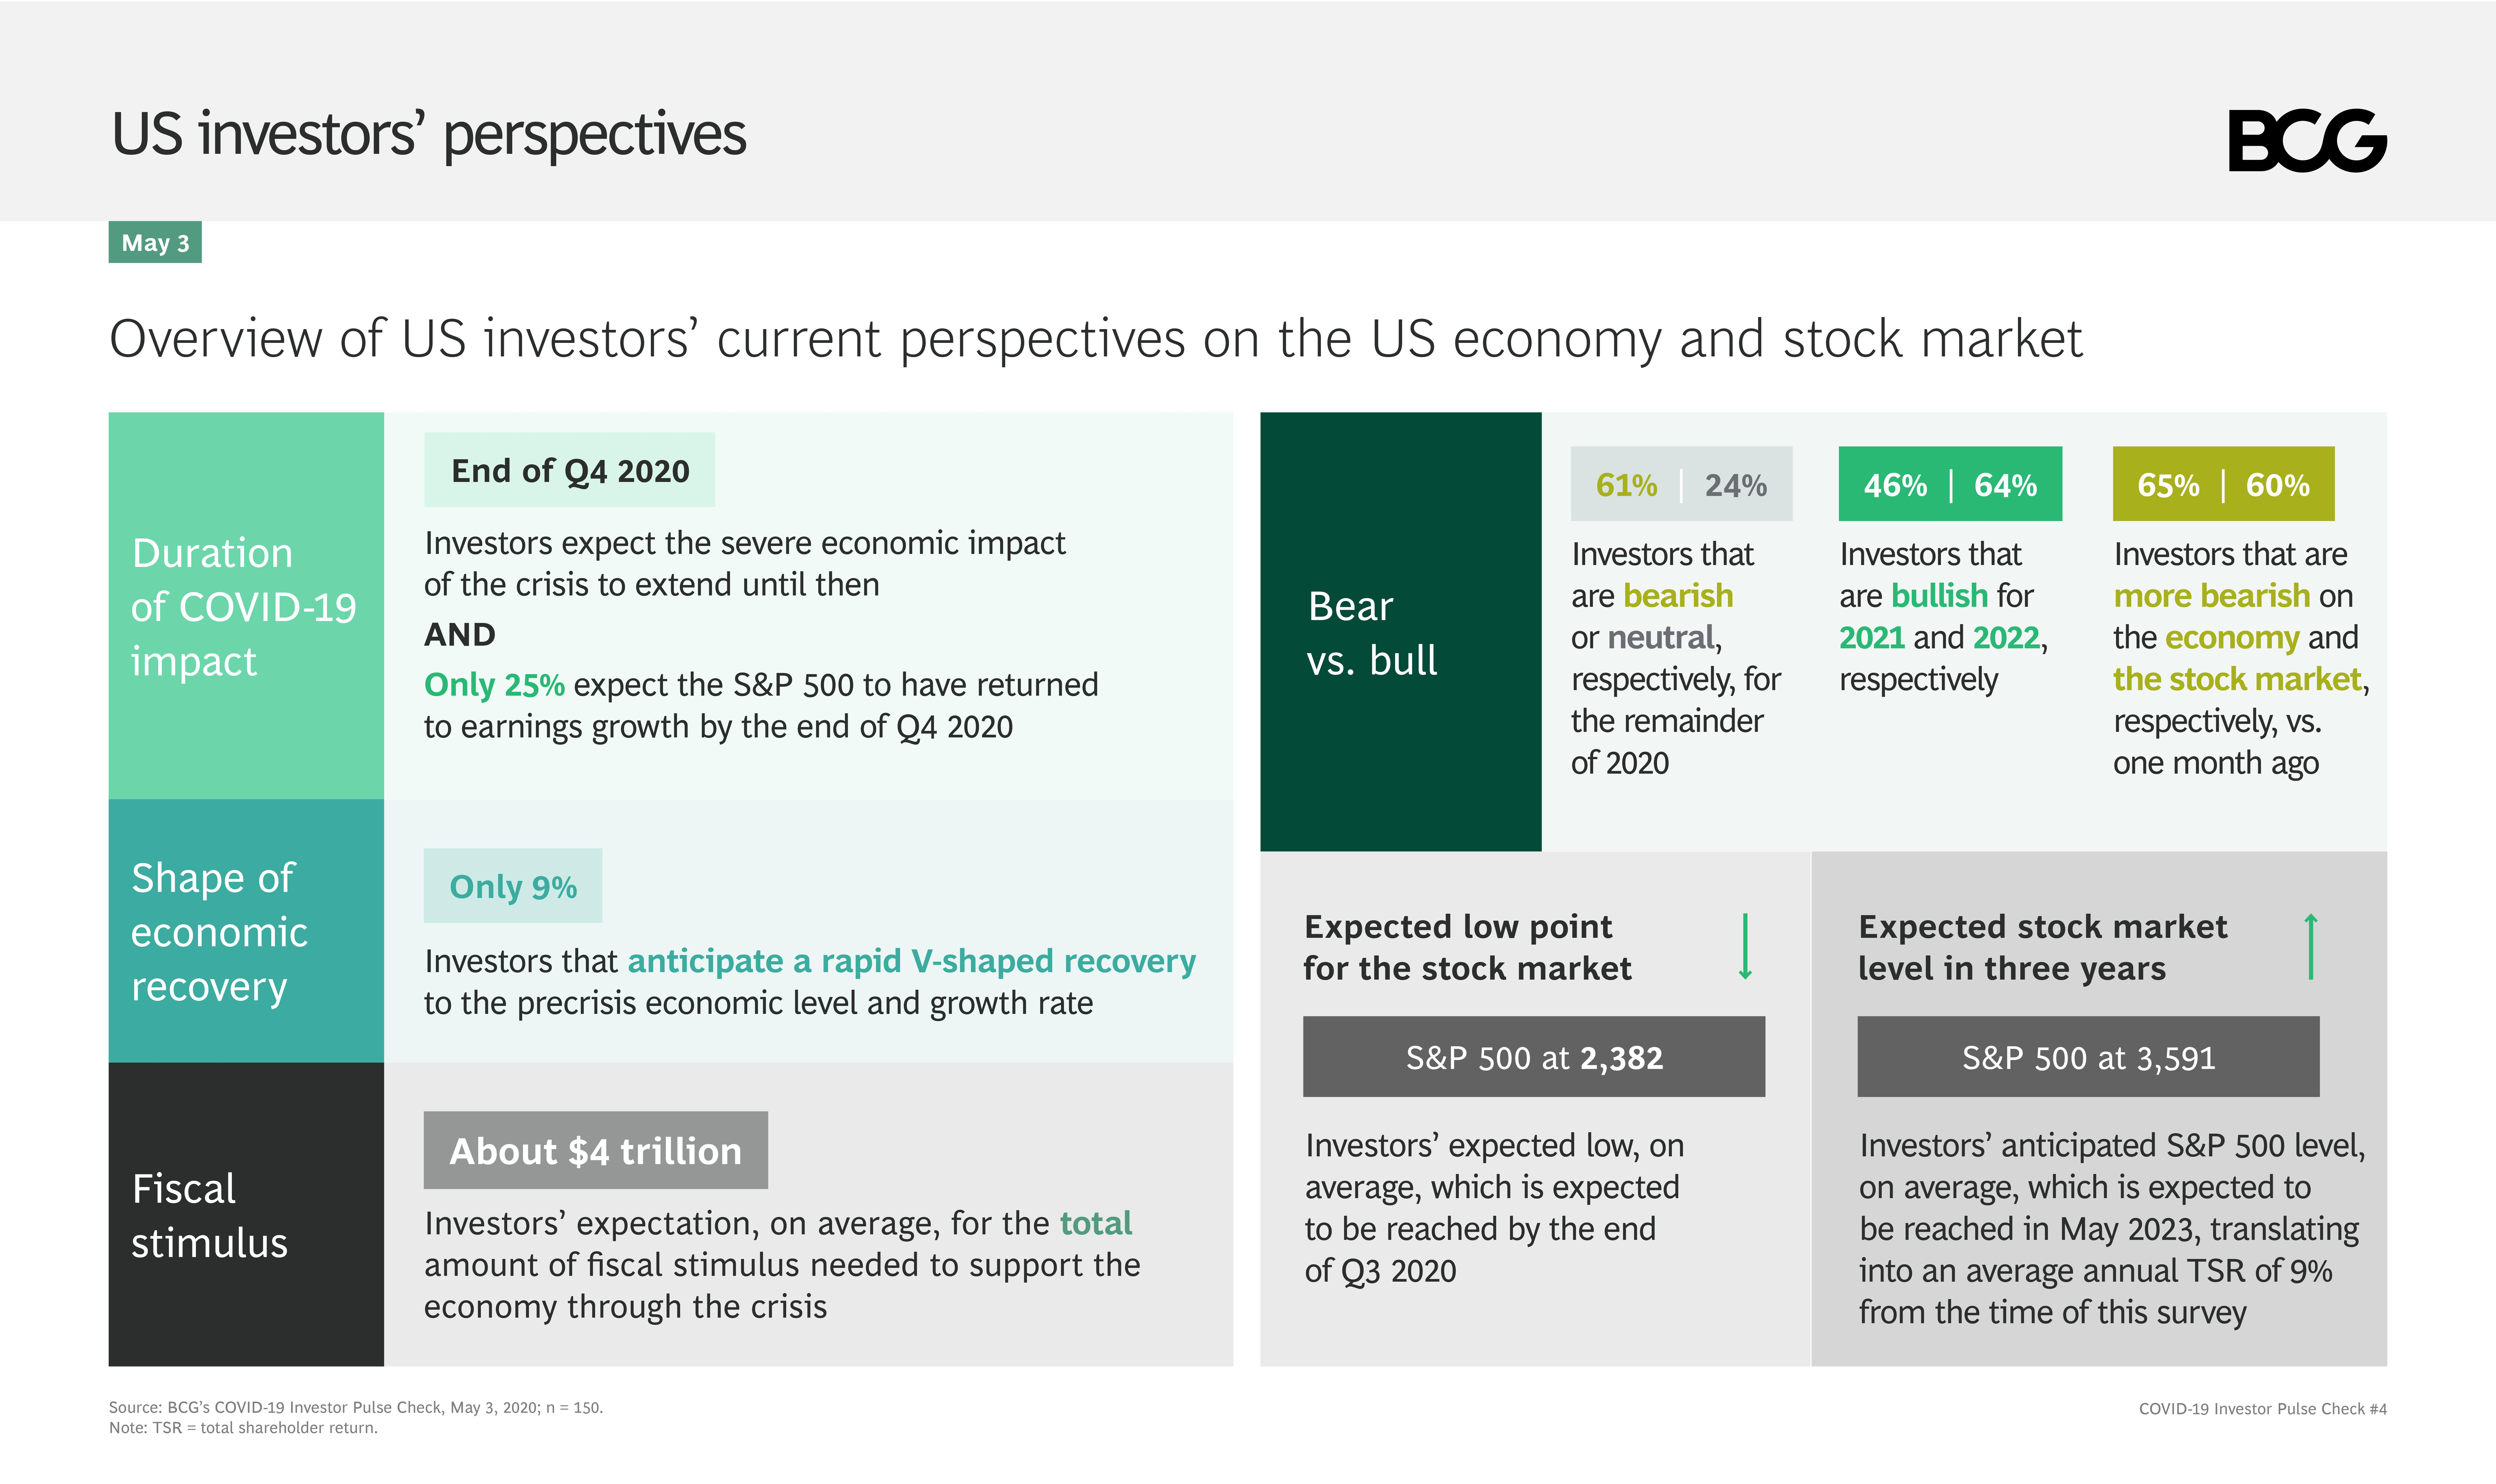 US investors' current perspective on the US economy and stock market during COVID-19